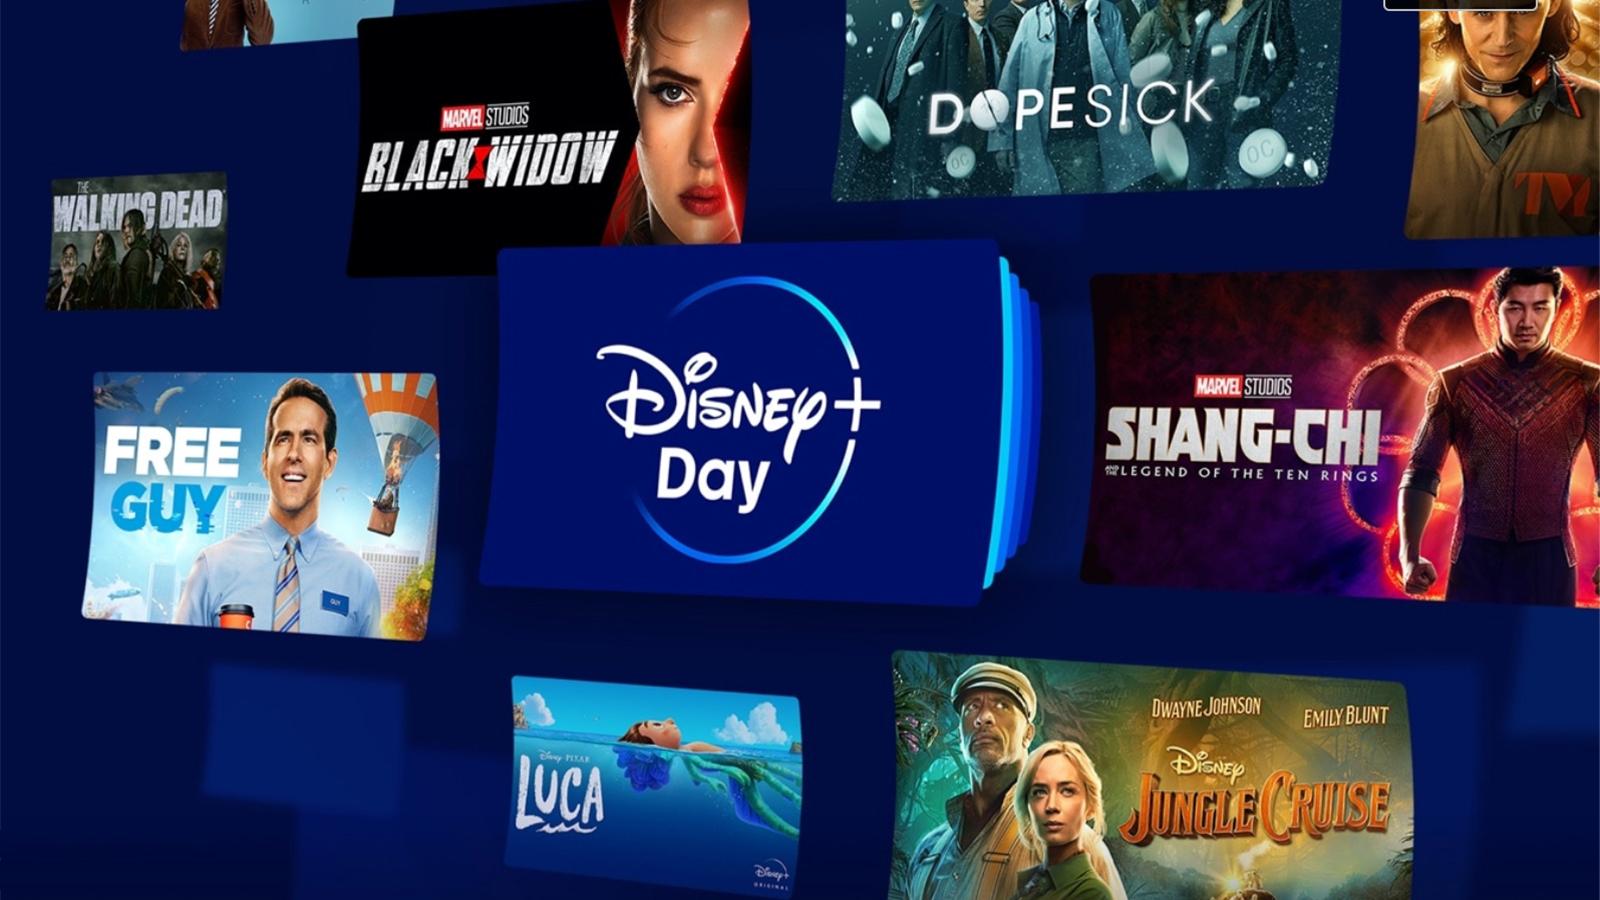 The Disney Plus logo surrounded by movie posters